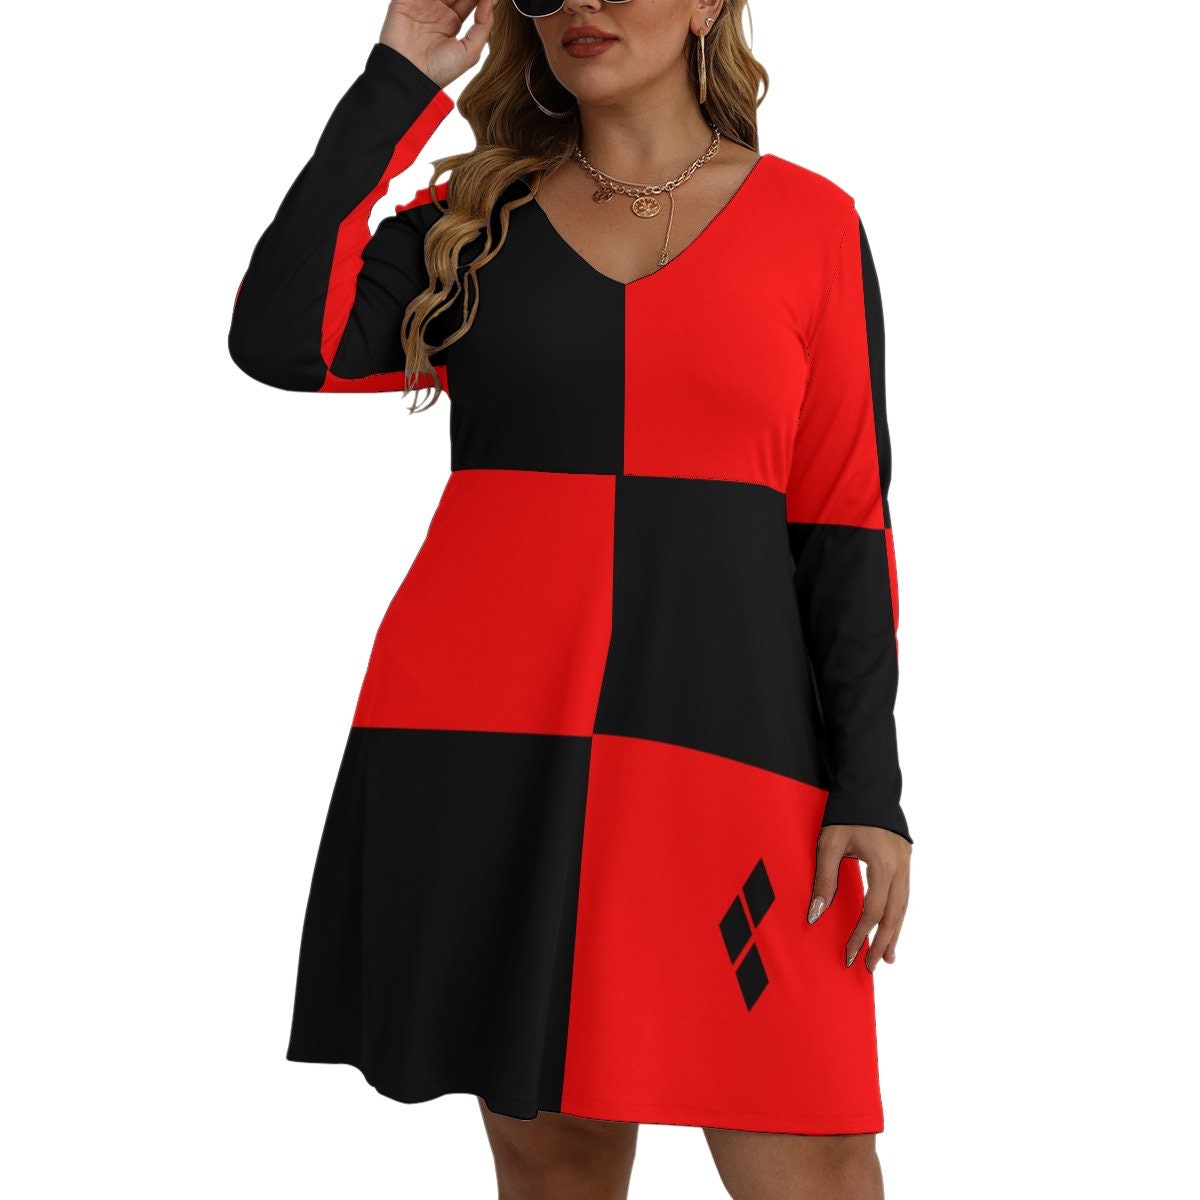 Queen of Diamonds Plus Size Harlequin Women's V-neck Long Sleeve Dress (Plus Size), Cosplay Dress, Halloween dress, Sexy BBW, Gift for Her